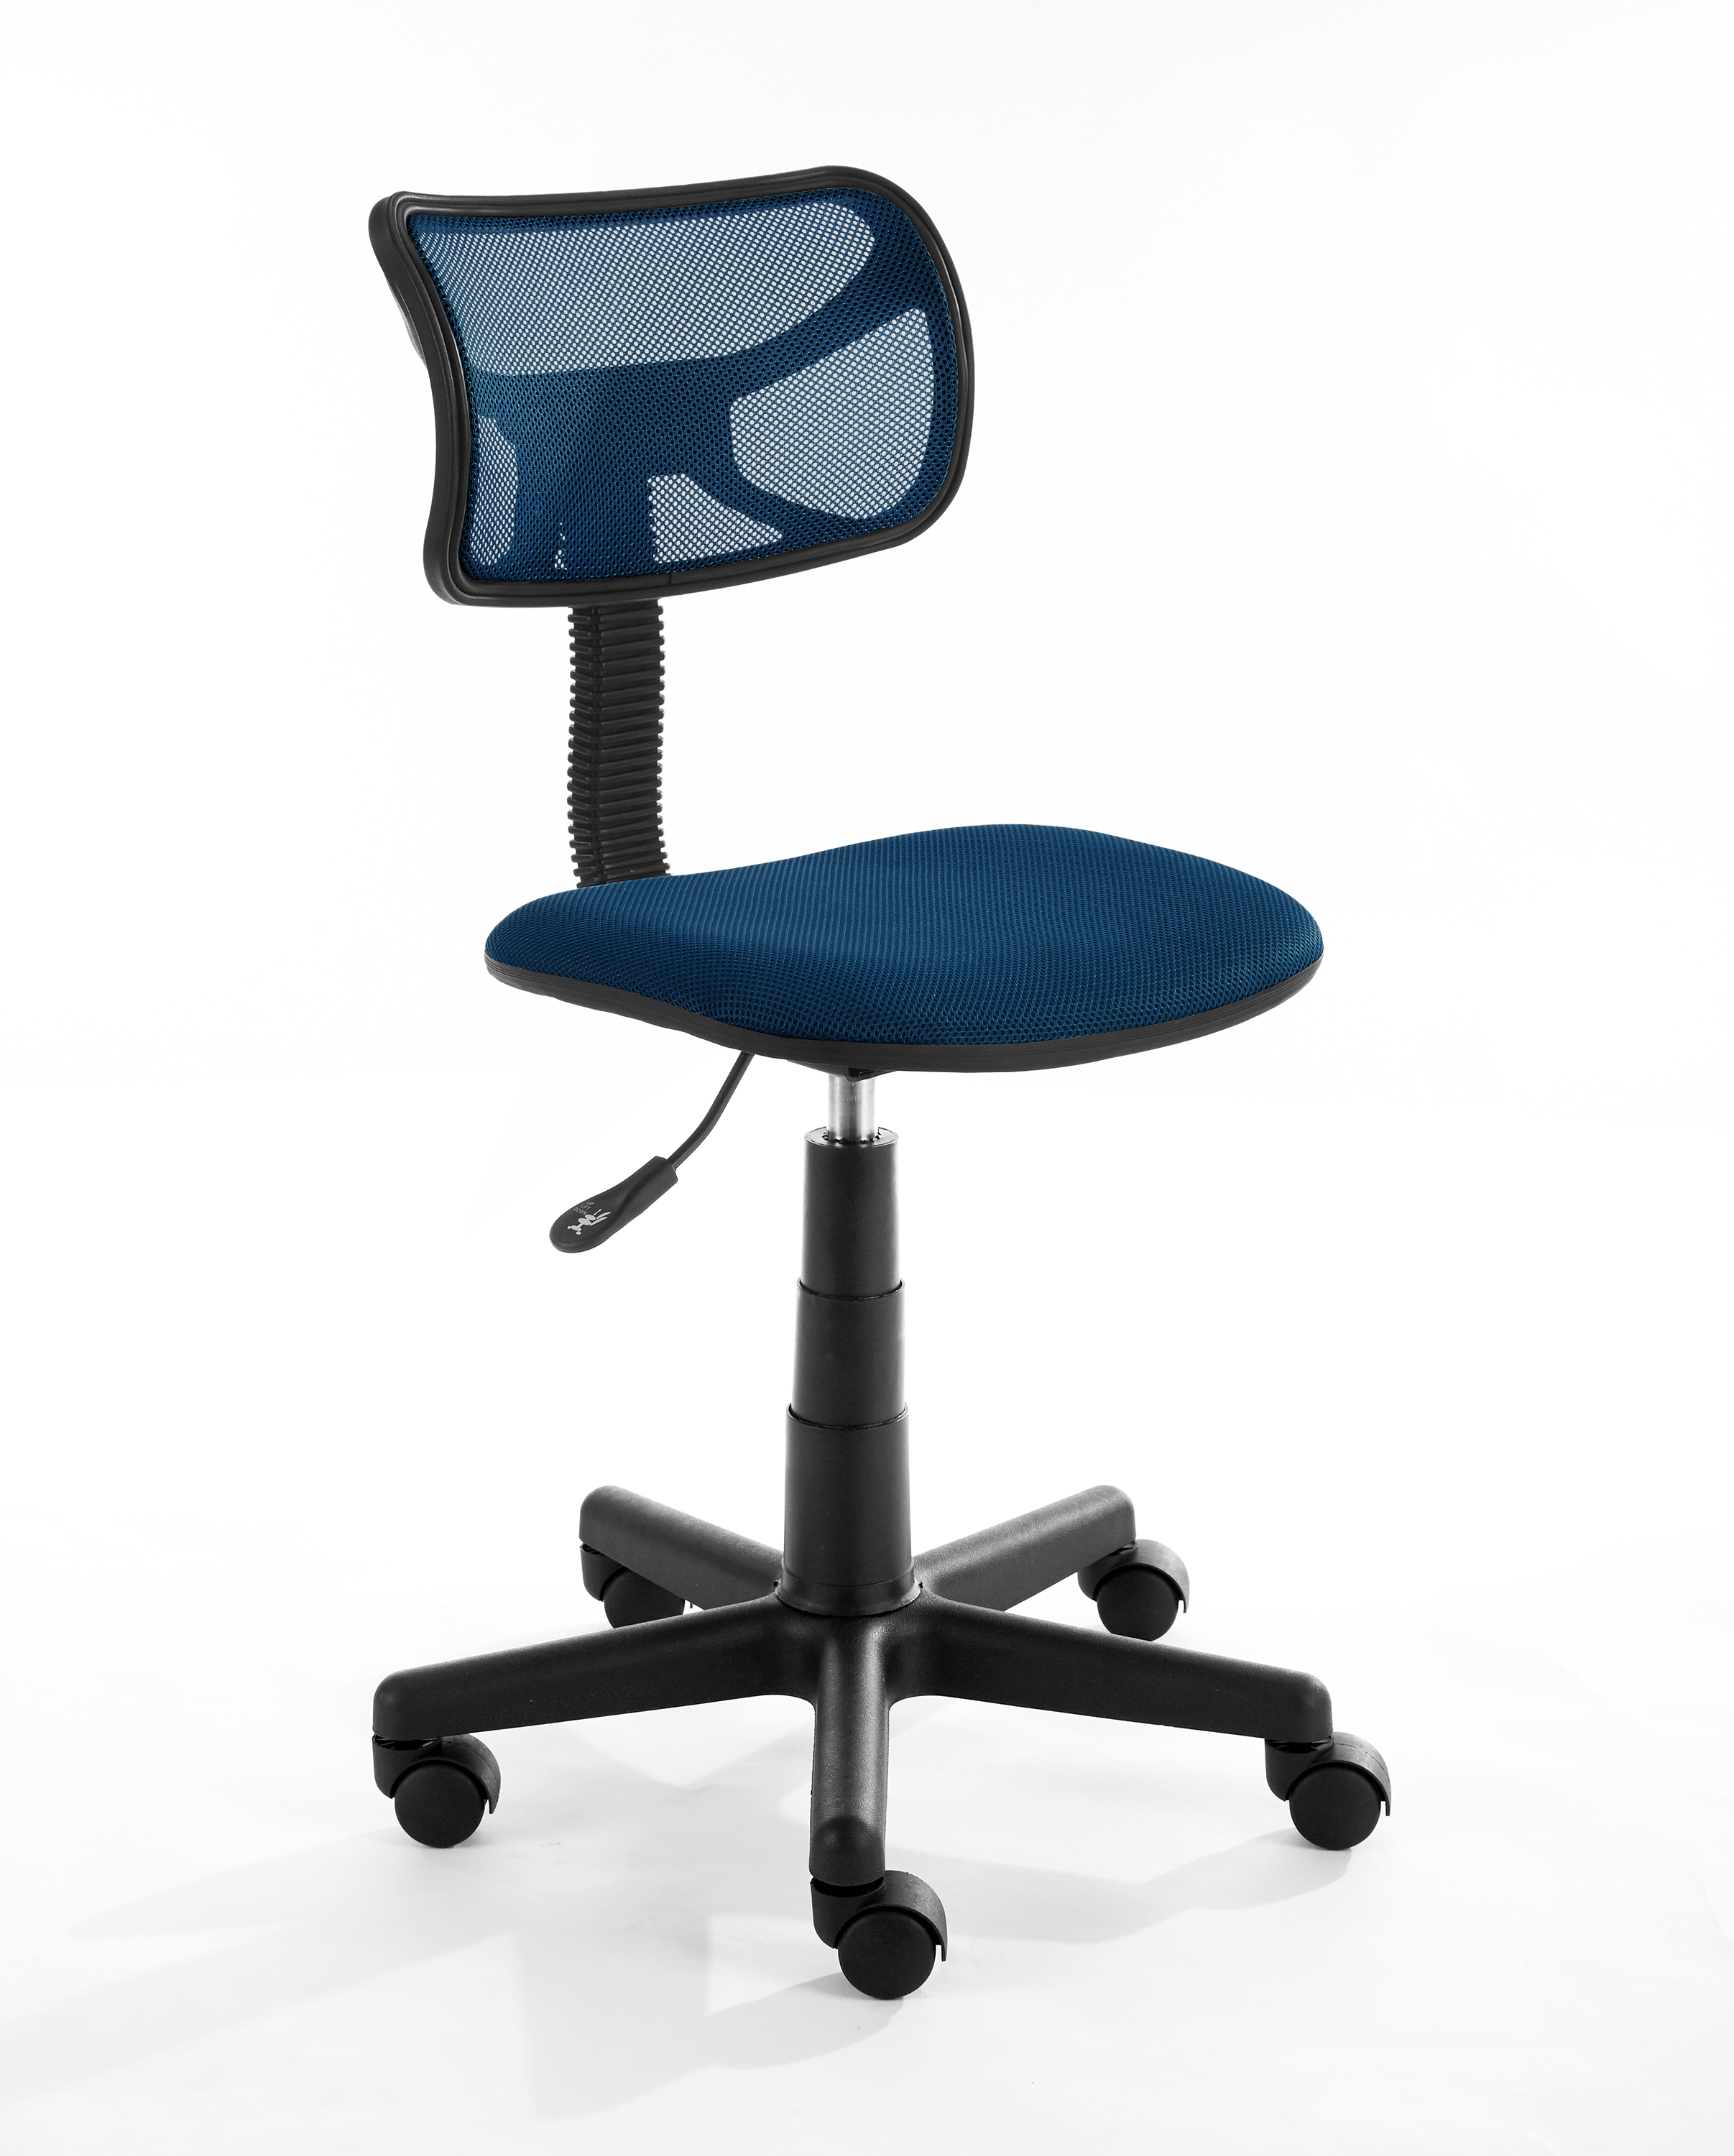 Urban Shop Task Chair with Adjustable Height & Swivel, 225 lb. Capacity, Multiple Colors - image 4 of 5